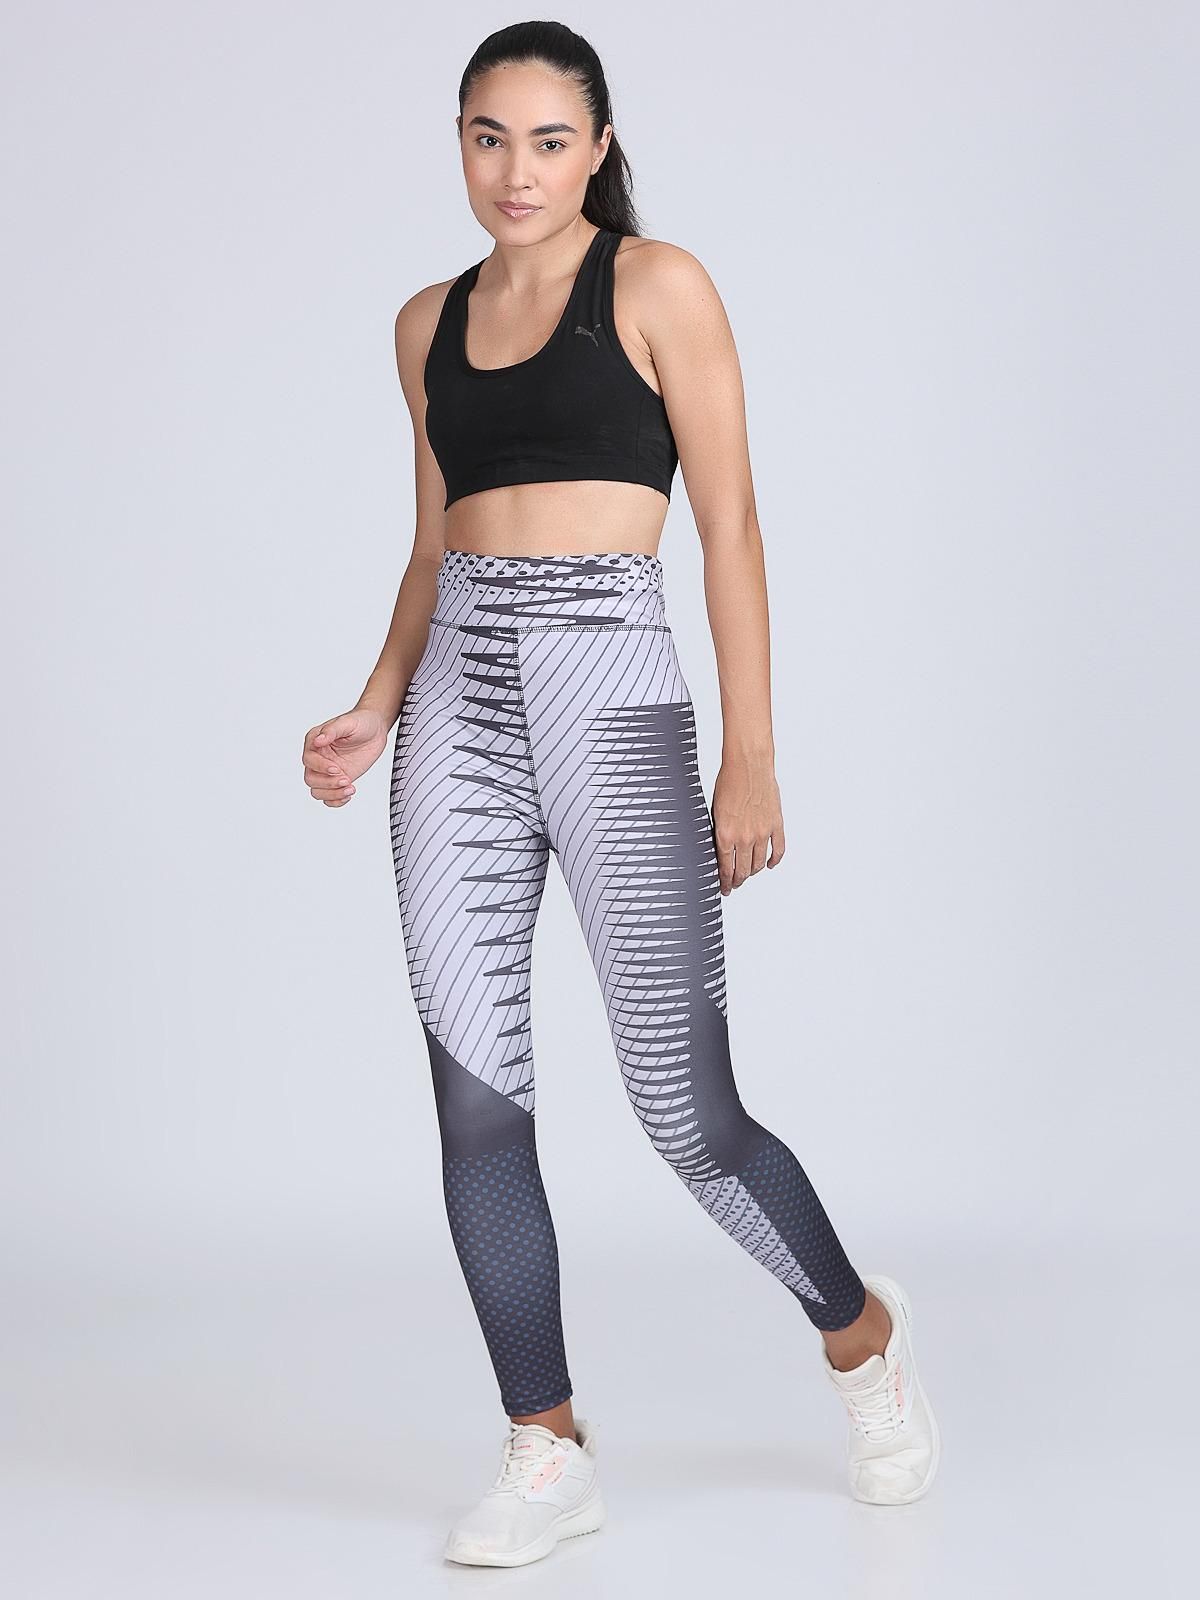 Women's 4-Way Stretch Yoga Pants with Striking Graphic Print – Elevate Your Style and Performance